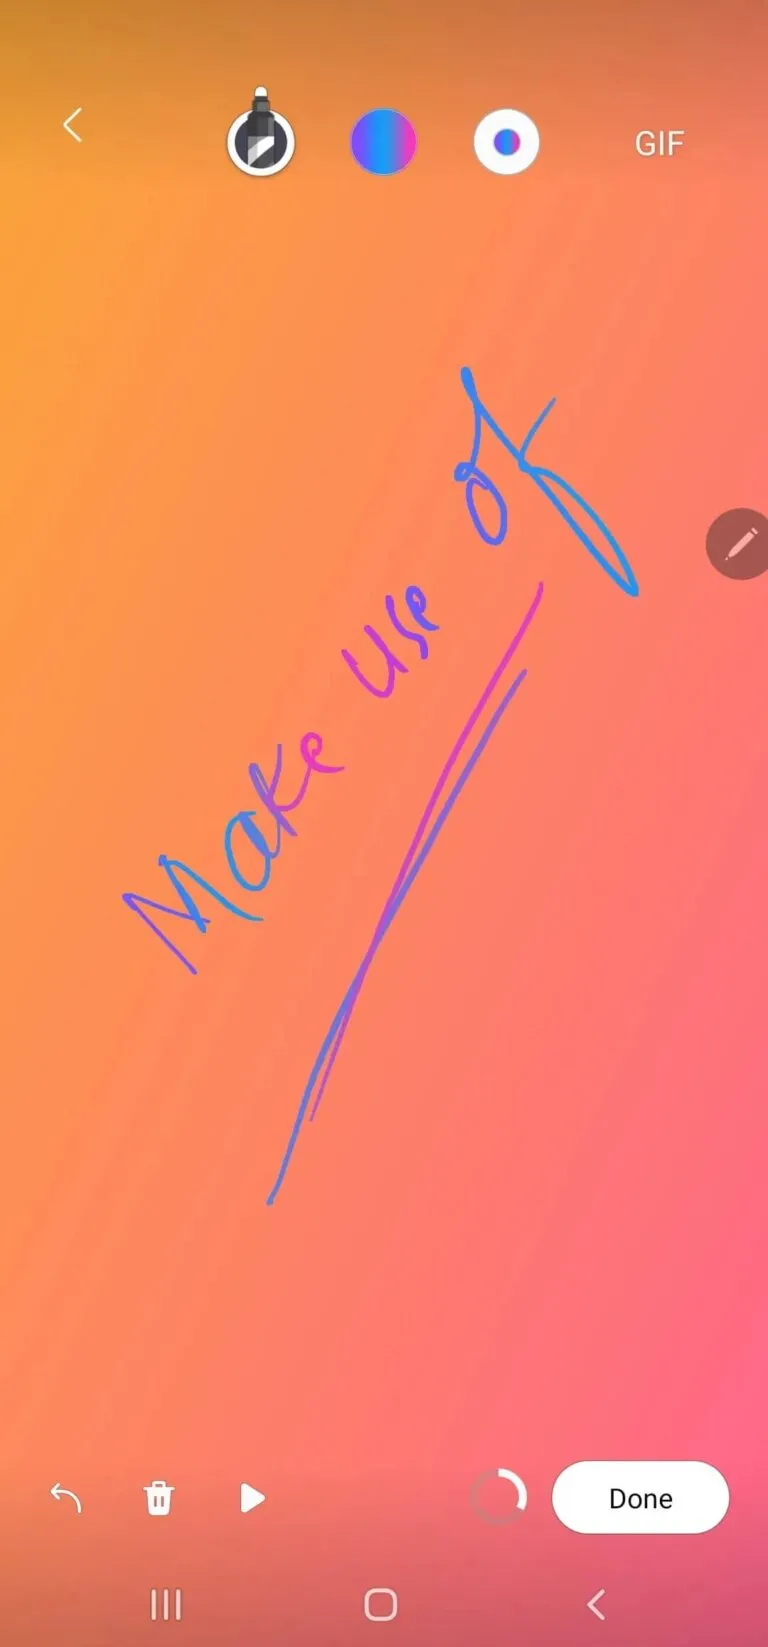 Galaxy S Pen feature Live Messages